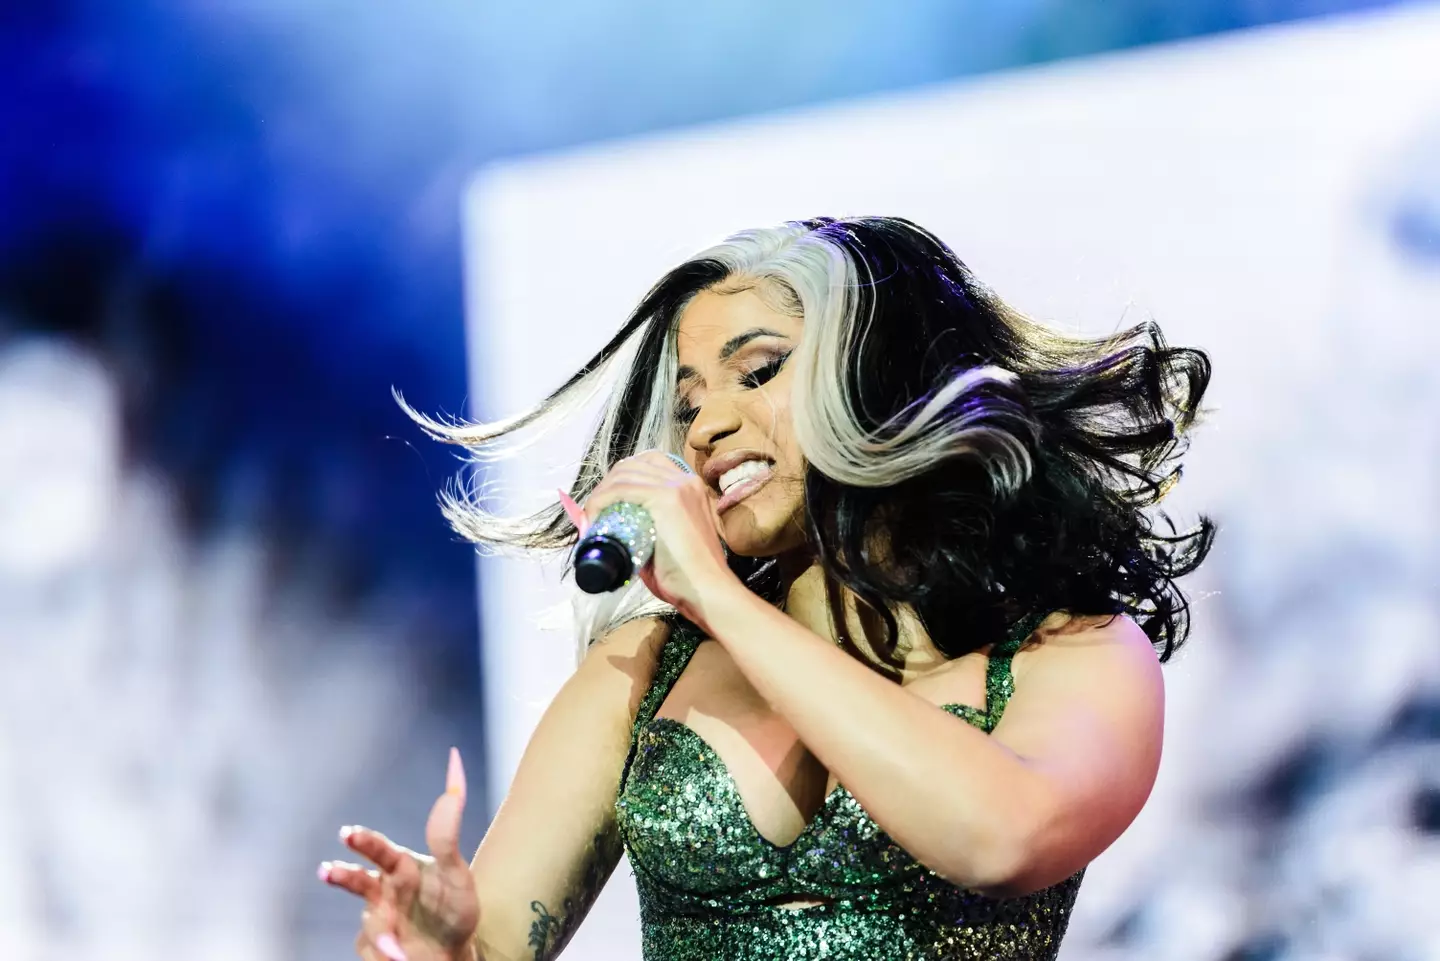 The rapper Cardi B wants to know how people are surviving in this economy.